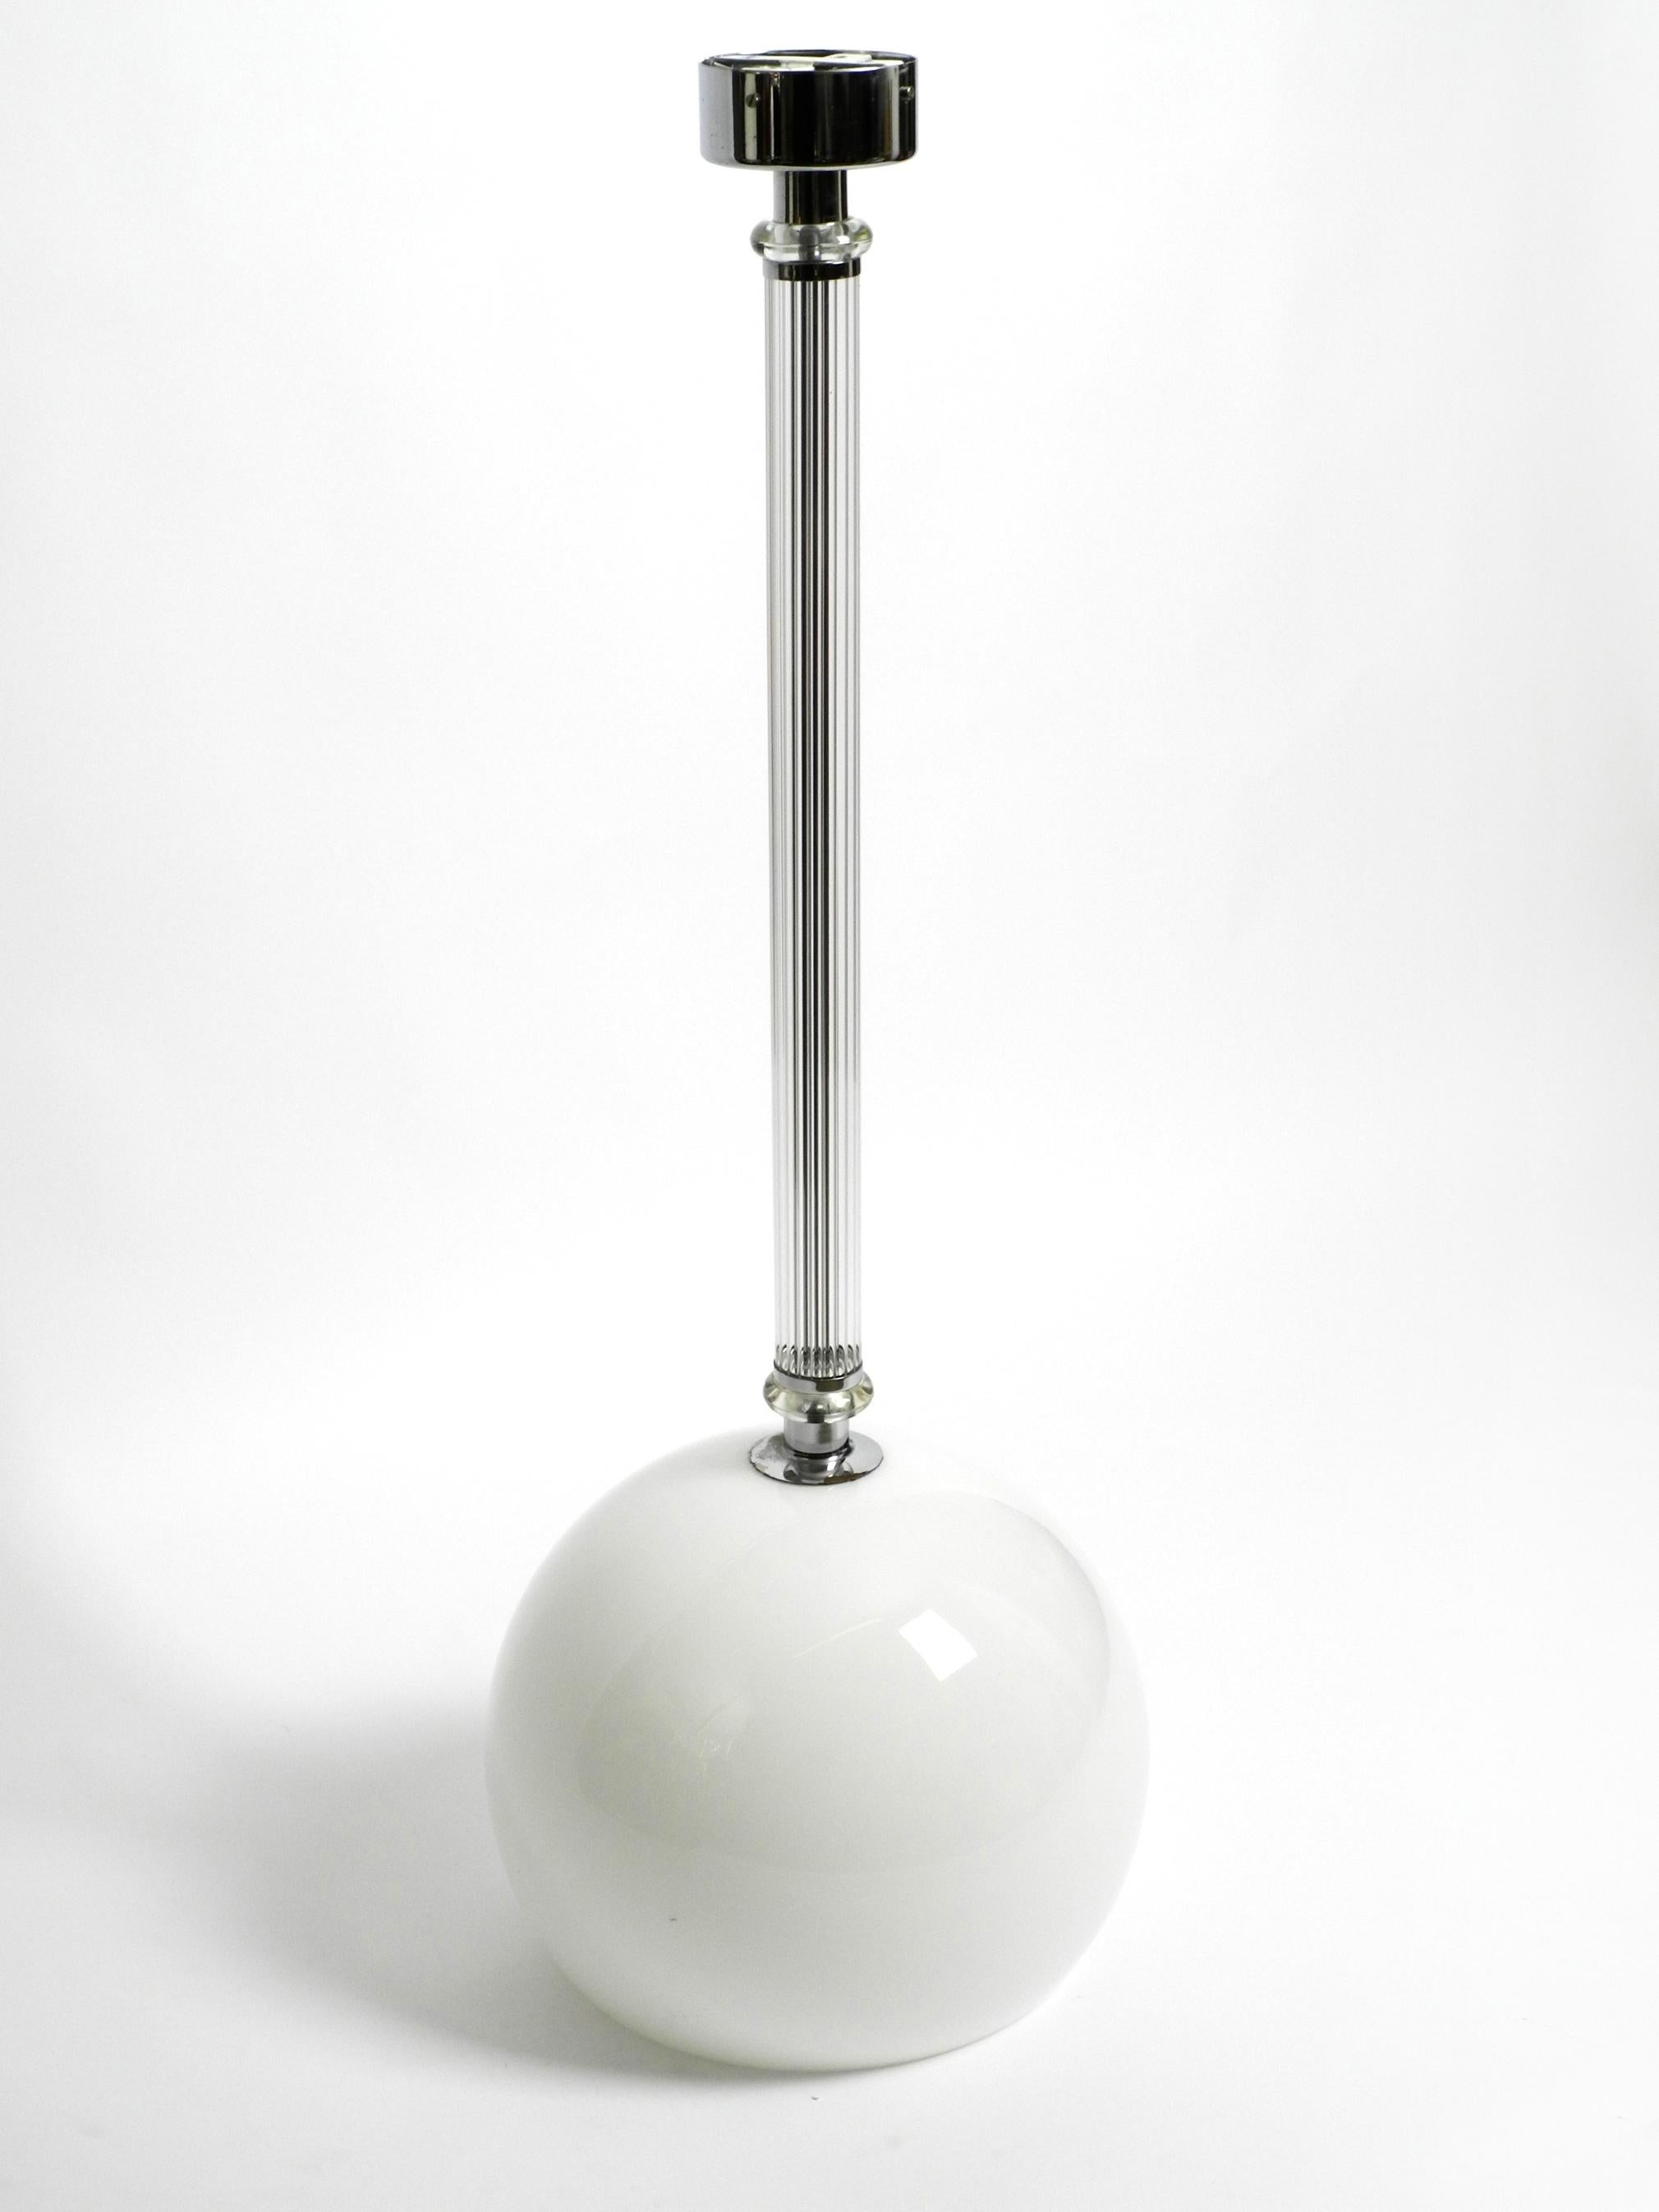 Large rare Czech mid century glass ceiling lamp with glass shade and glass rod.
Very nice Minimalist 50s design.
The shade is made of thick, heavy frosted glass, 
the rod is made of chrome-plated metal and glass around the outside.
Makes a great